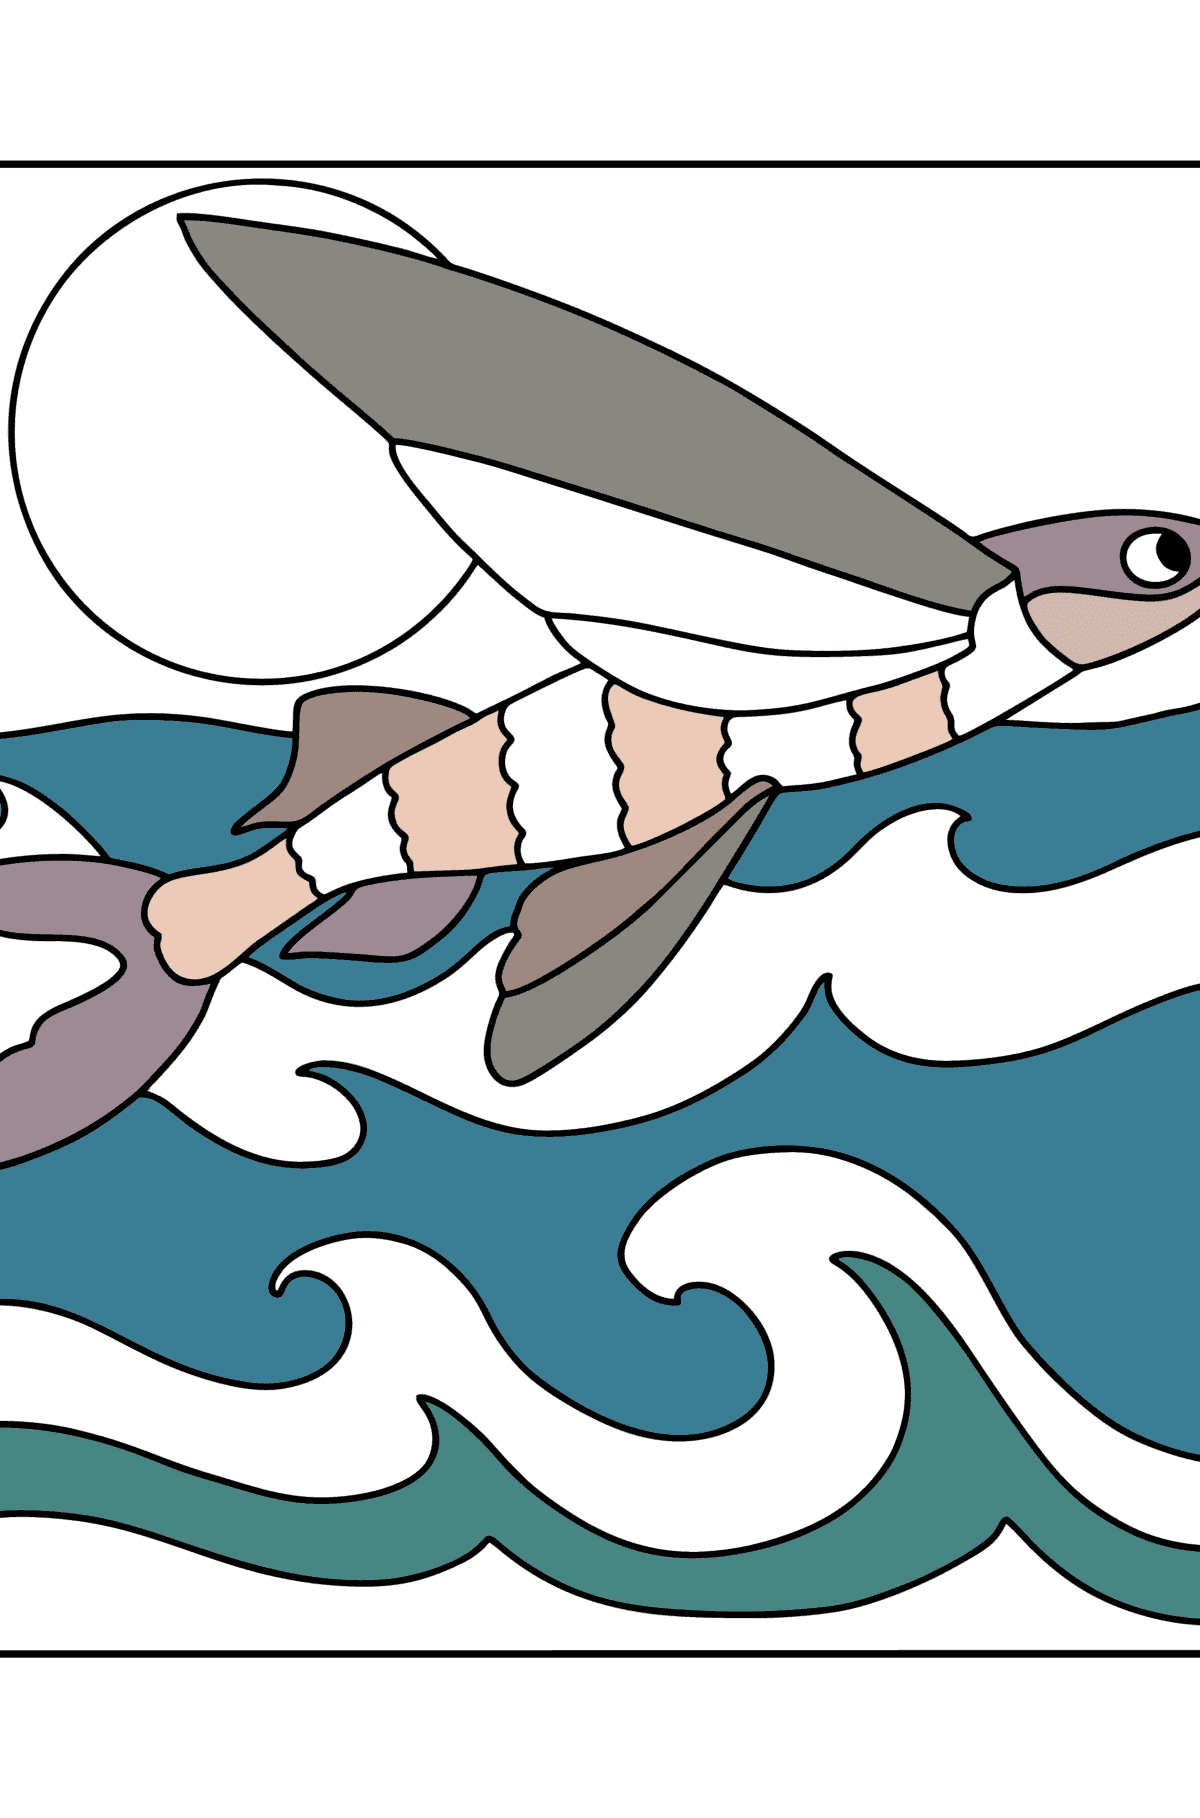 Flying fish coloring page - Coloring Pages for Kids